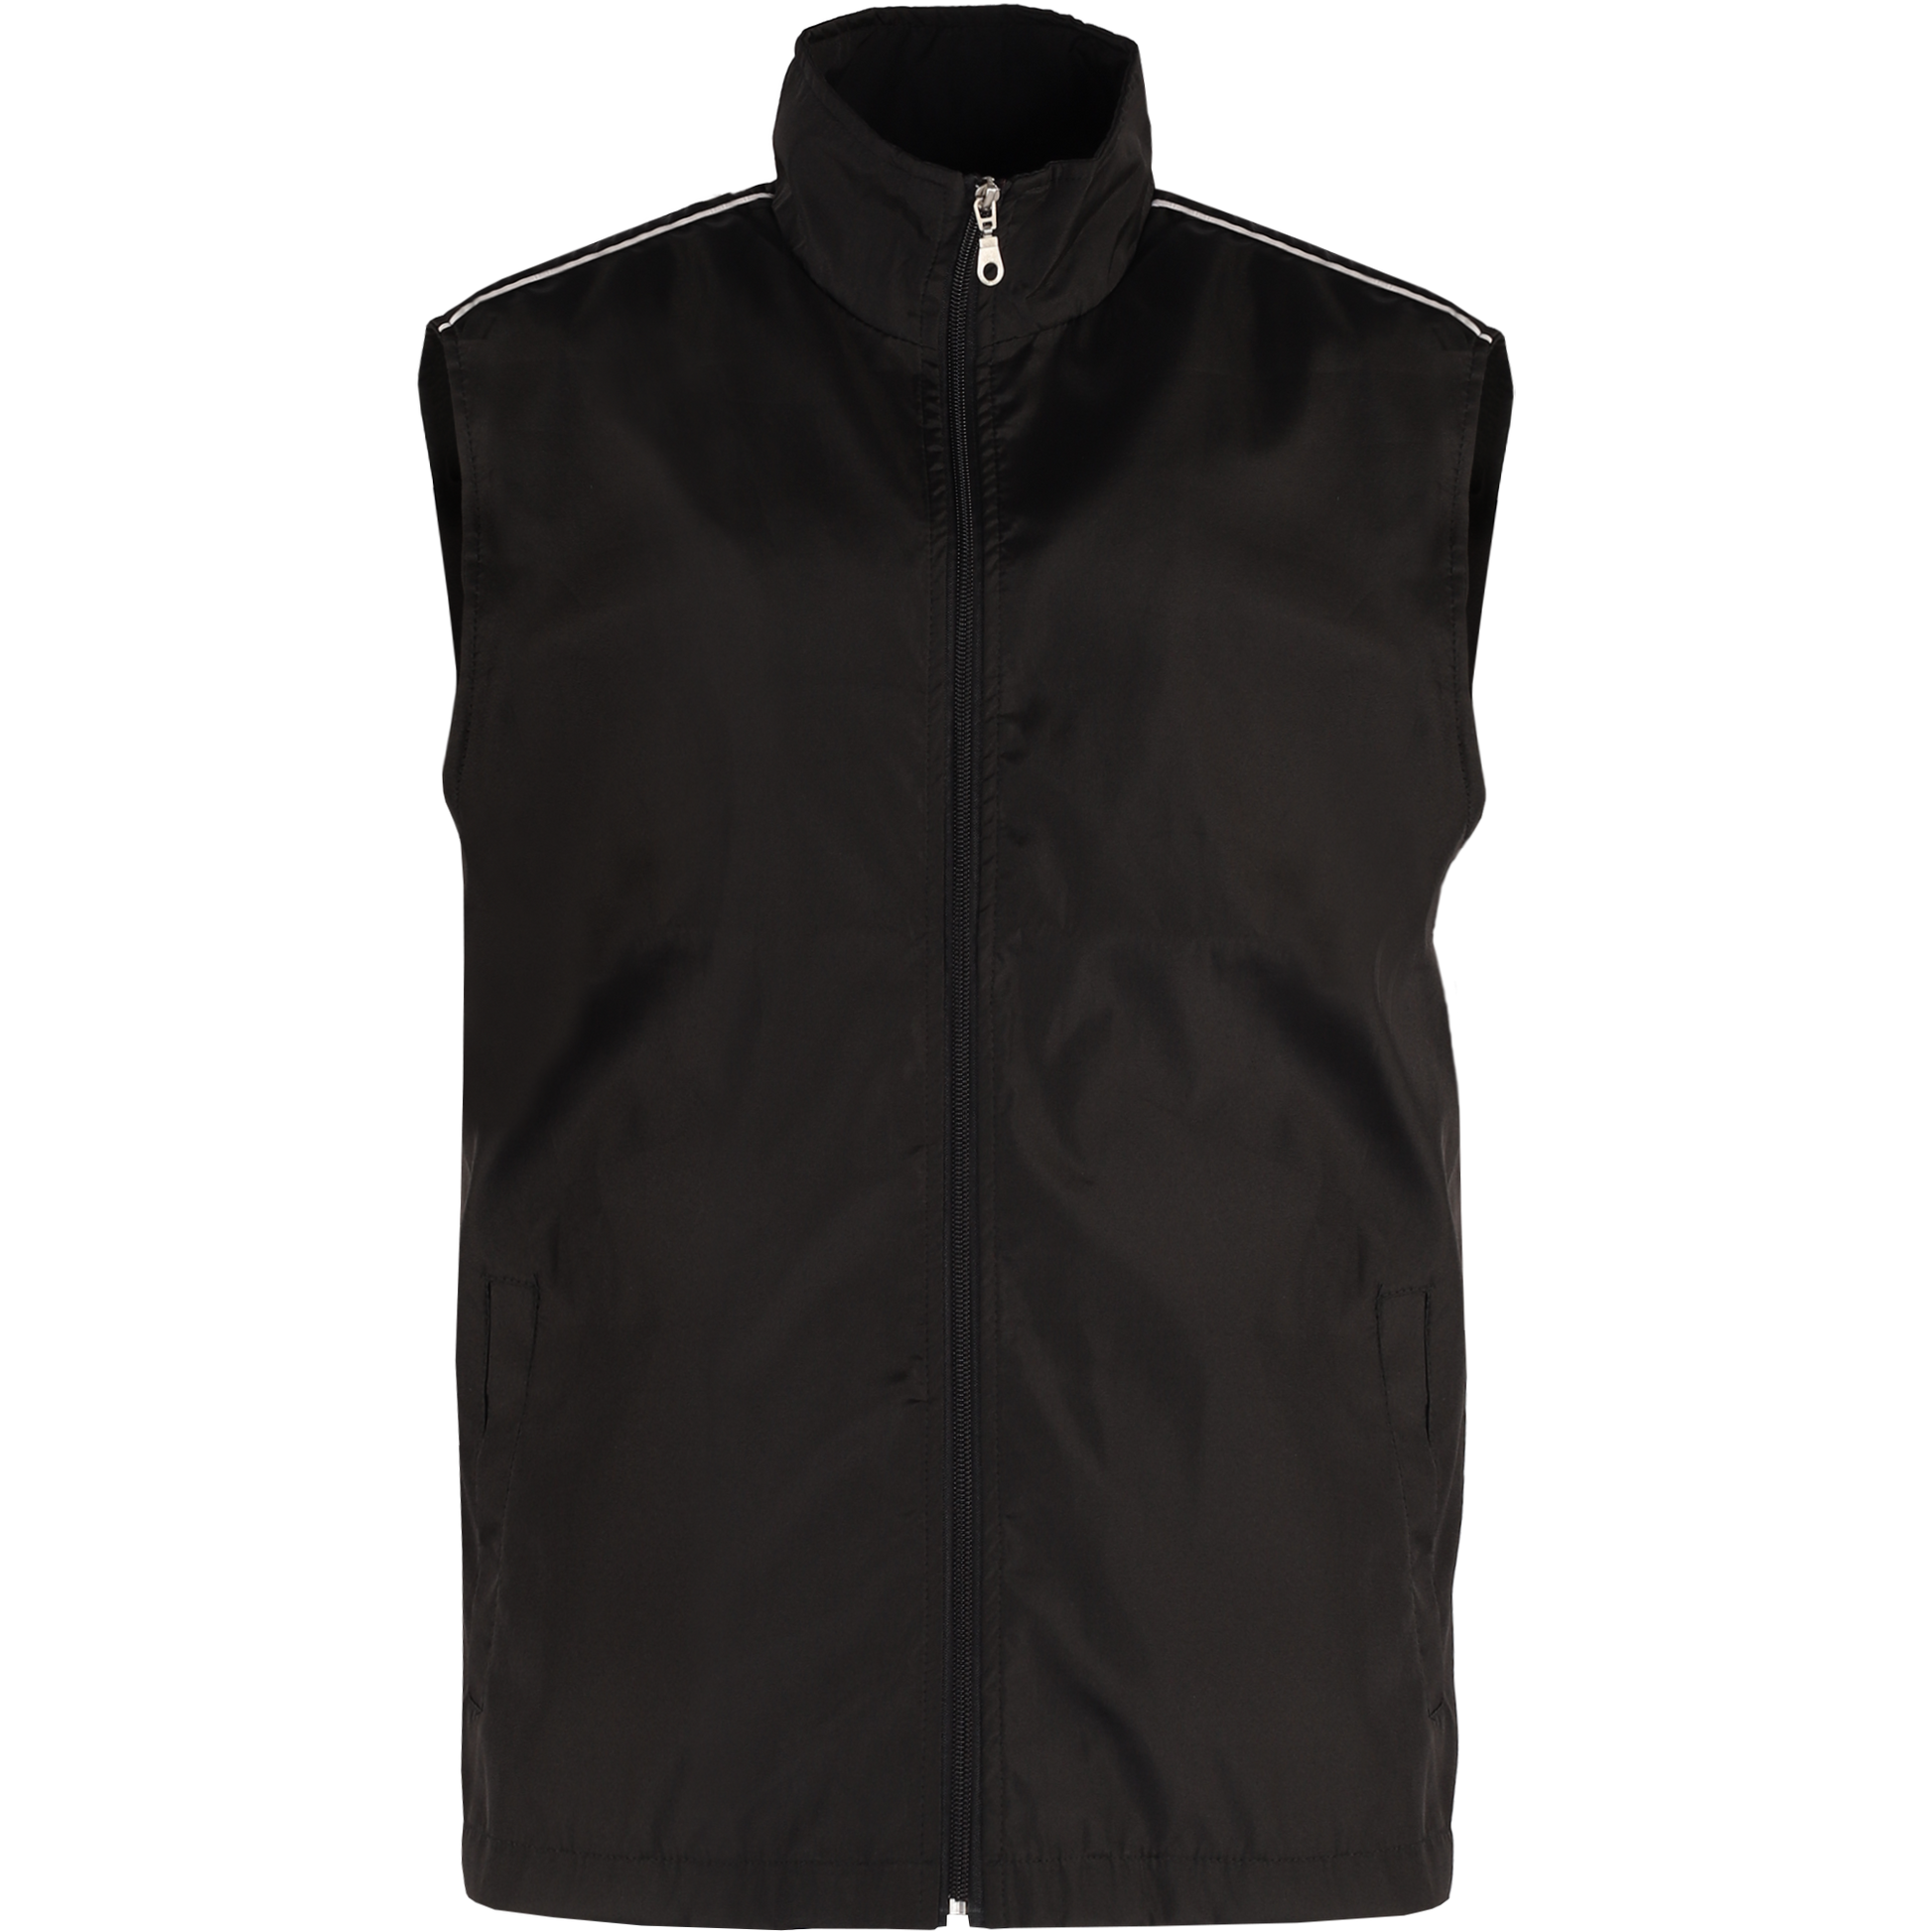 Lightweight Gilet in Black - Uniform by CYC Corporate Label Singapore